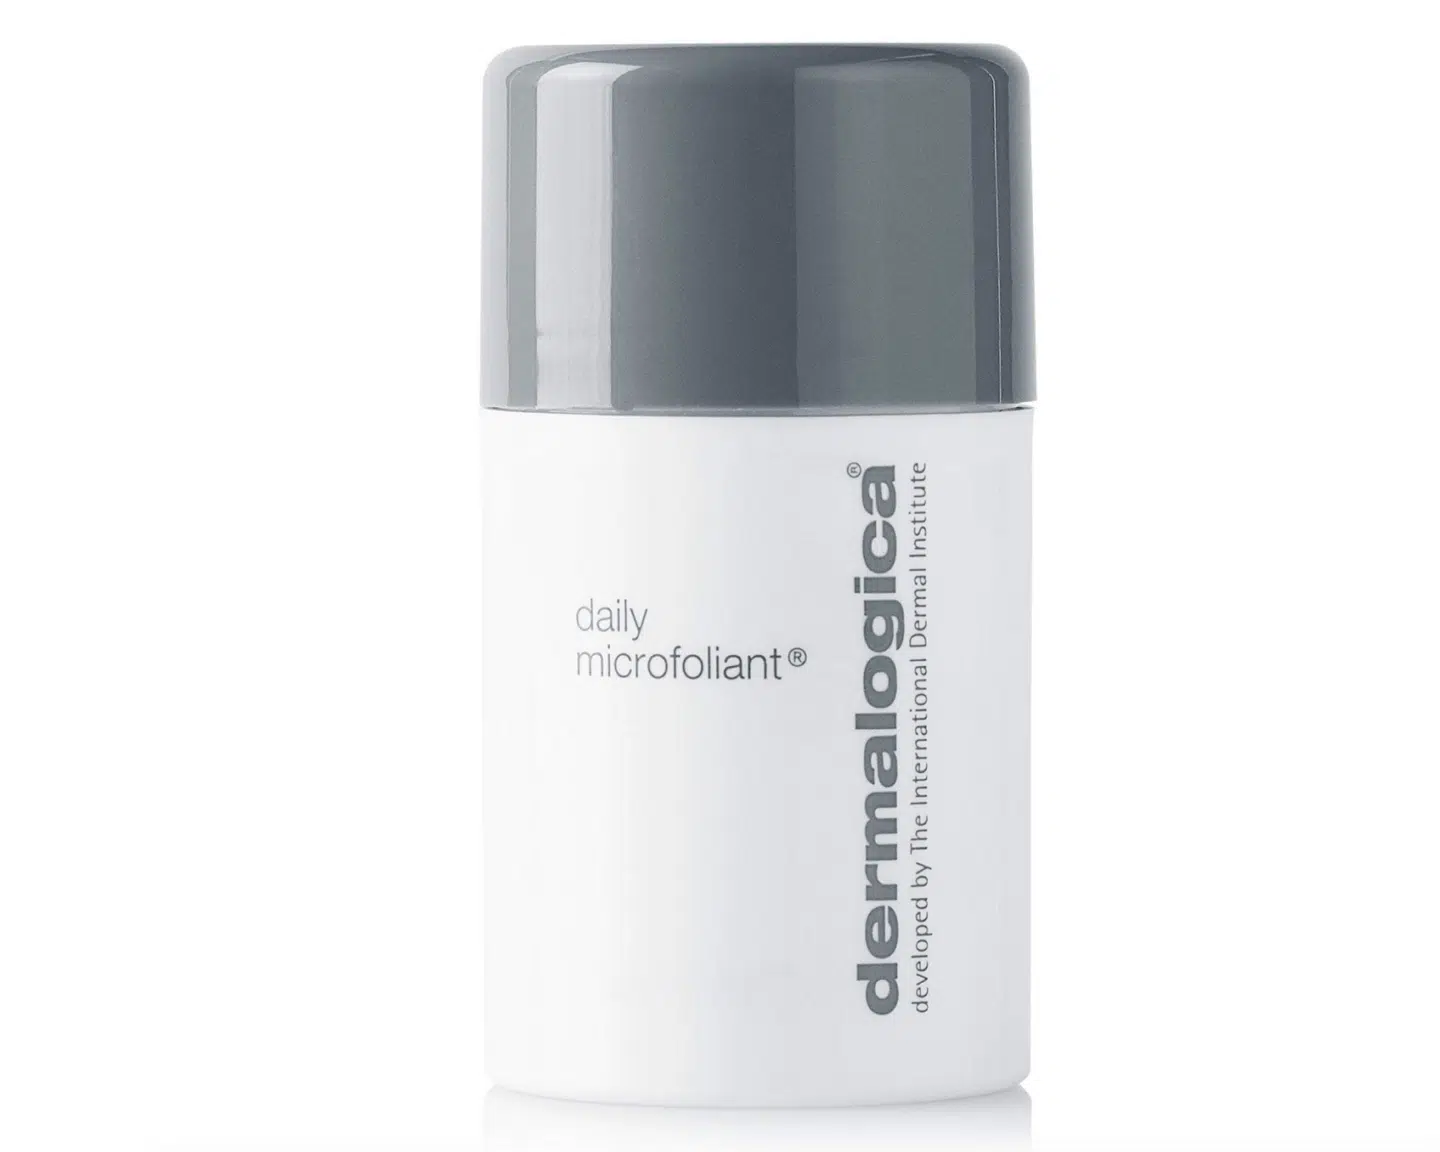 Best Face Exfoliator for Mature Skin, by lifestyle blogger What The Fab